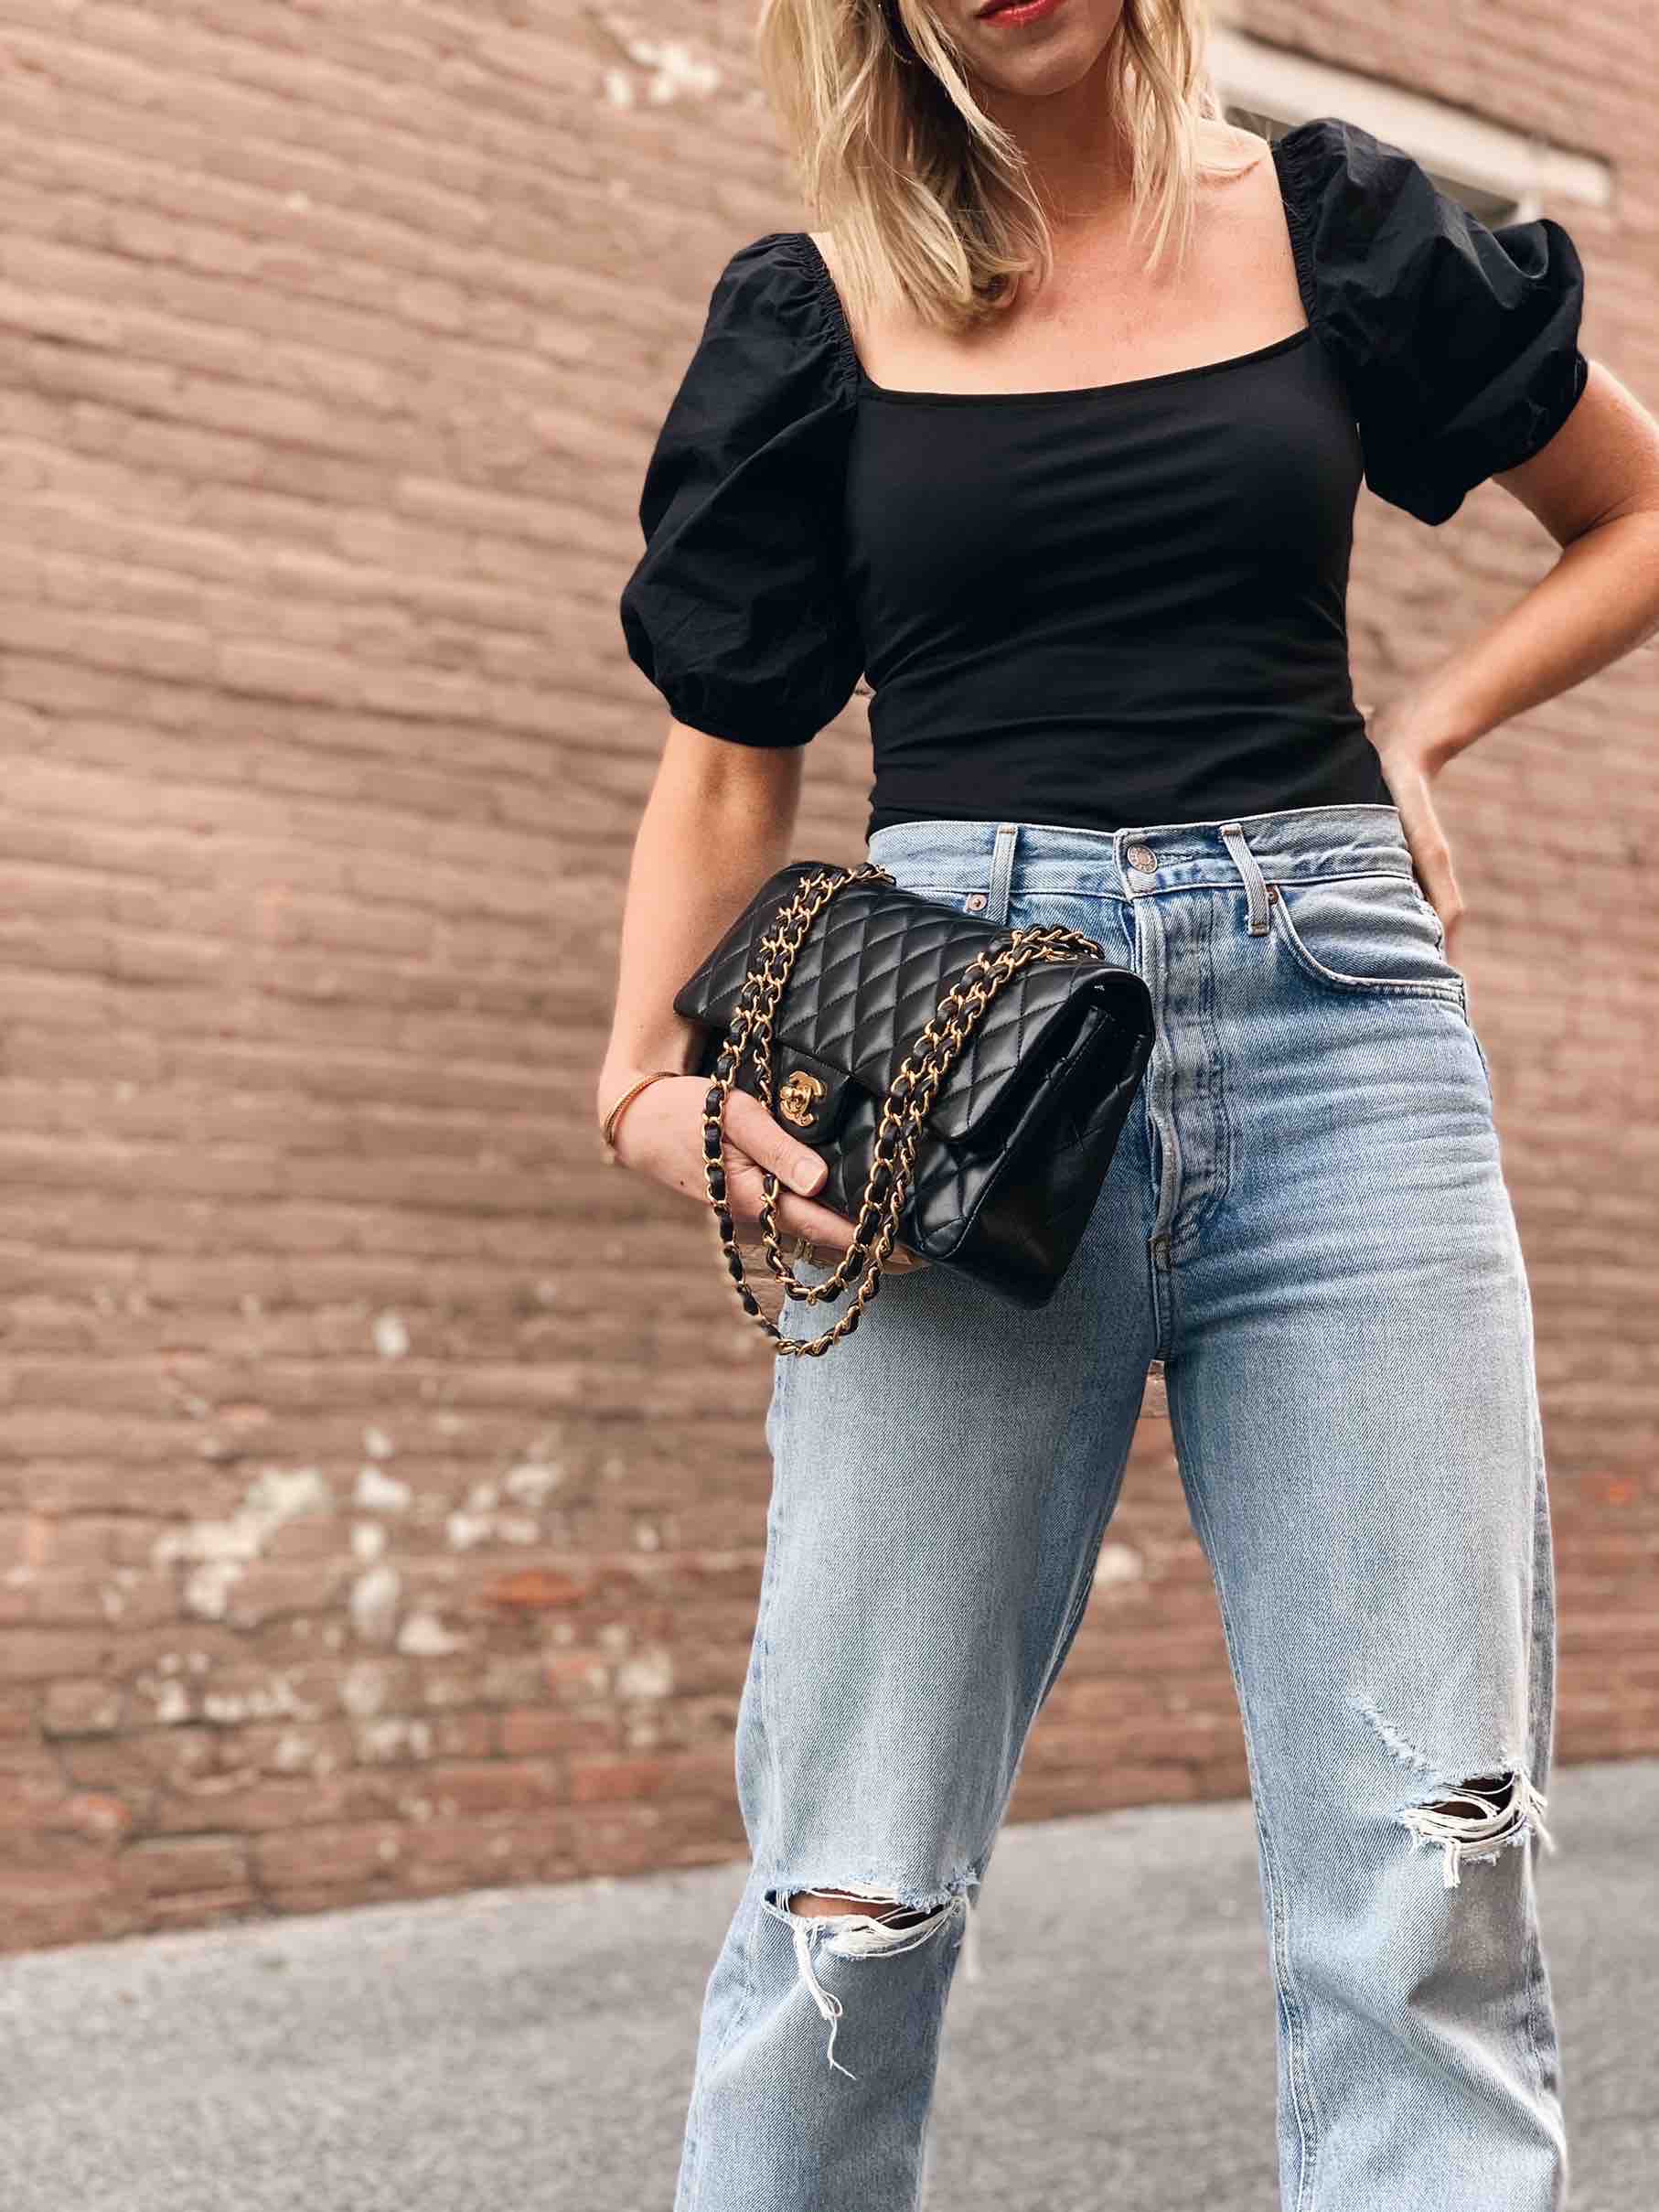 A puff-sleeve top looks perfect juxtaposed with cargo jeans